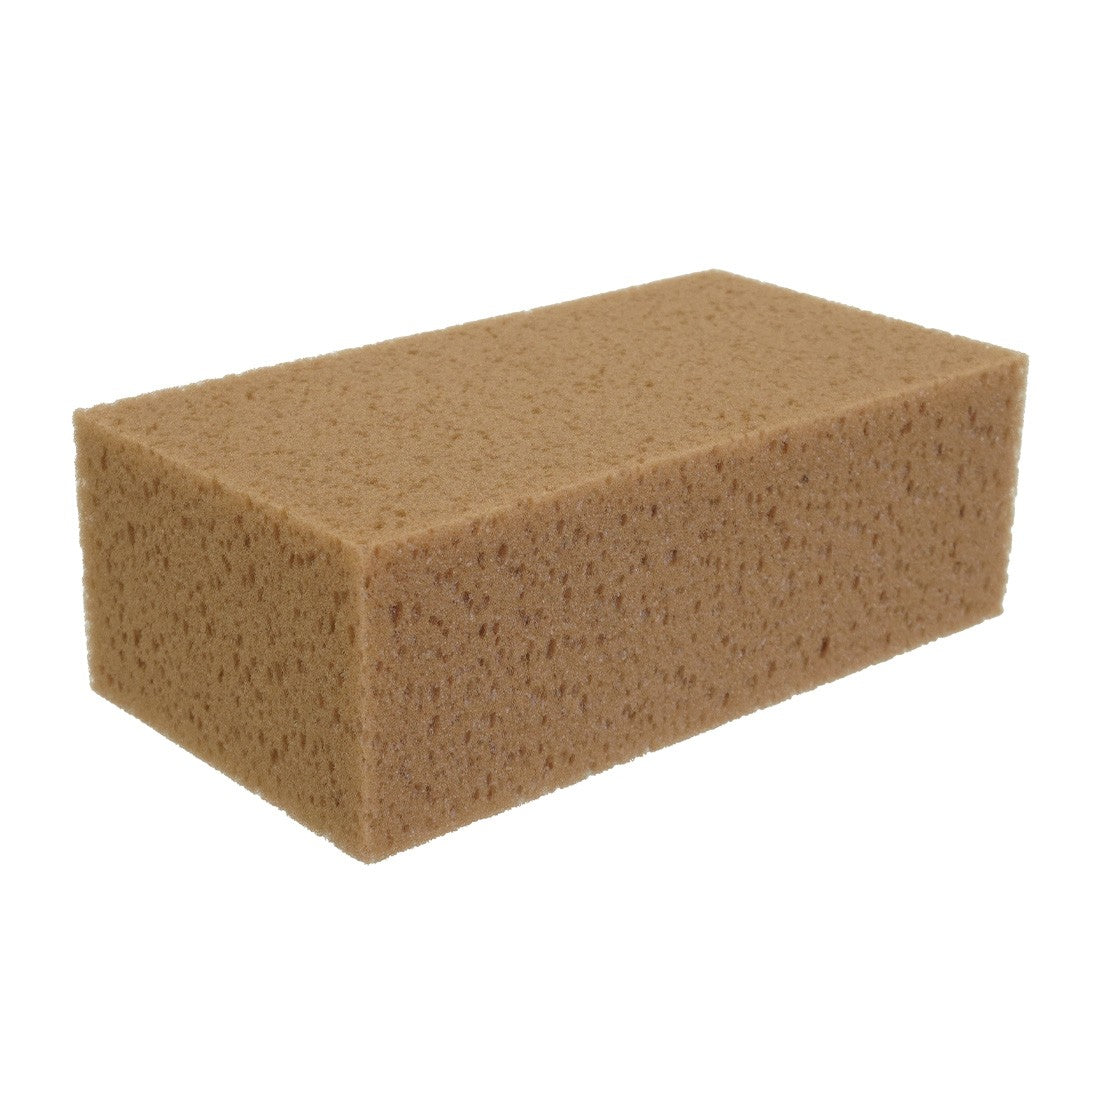 Pulex Sponge for Clamp Product View